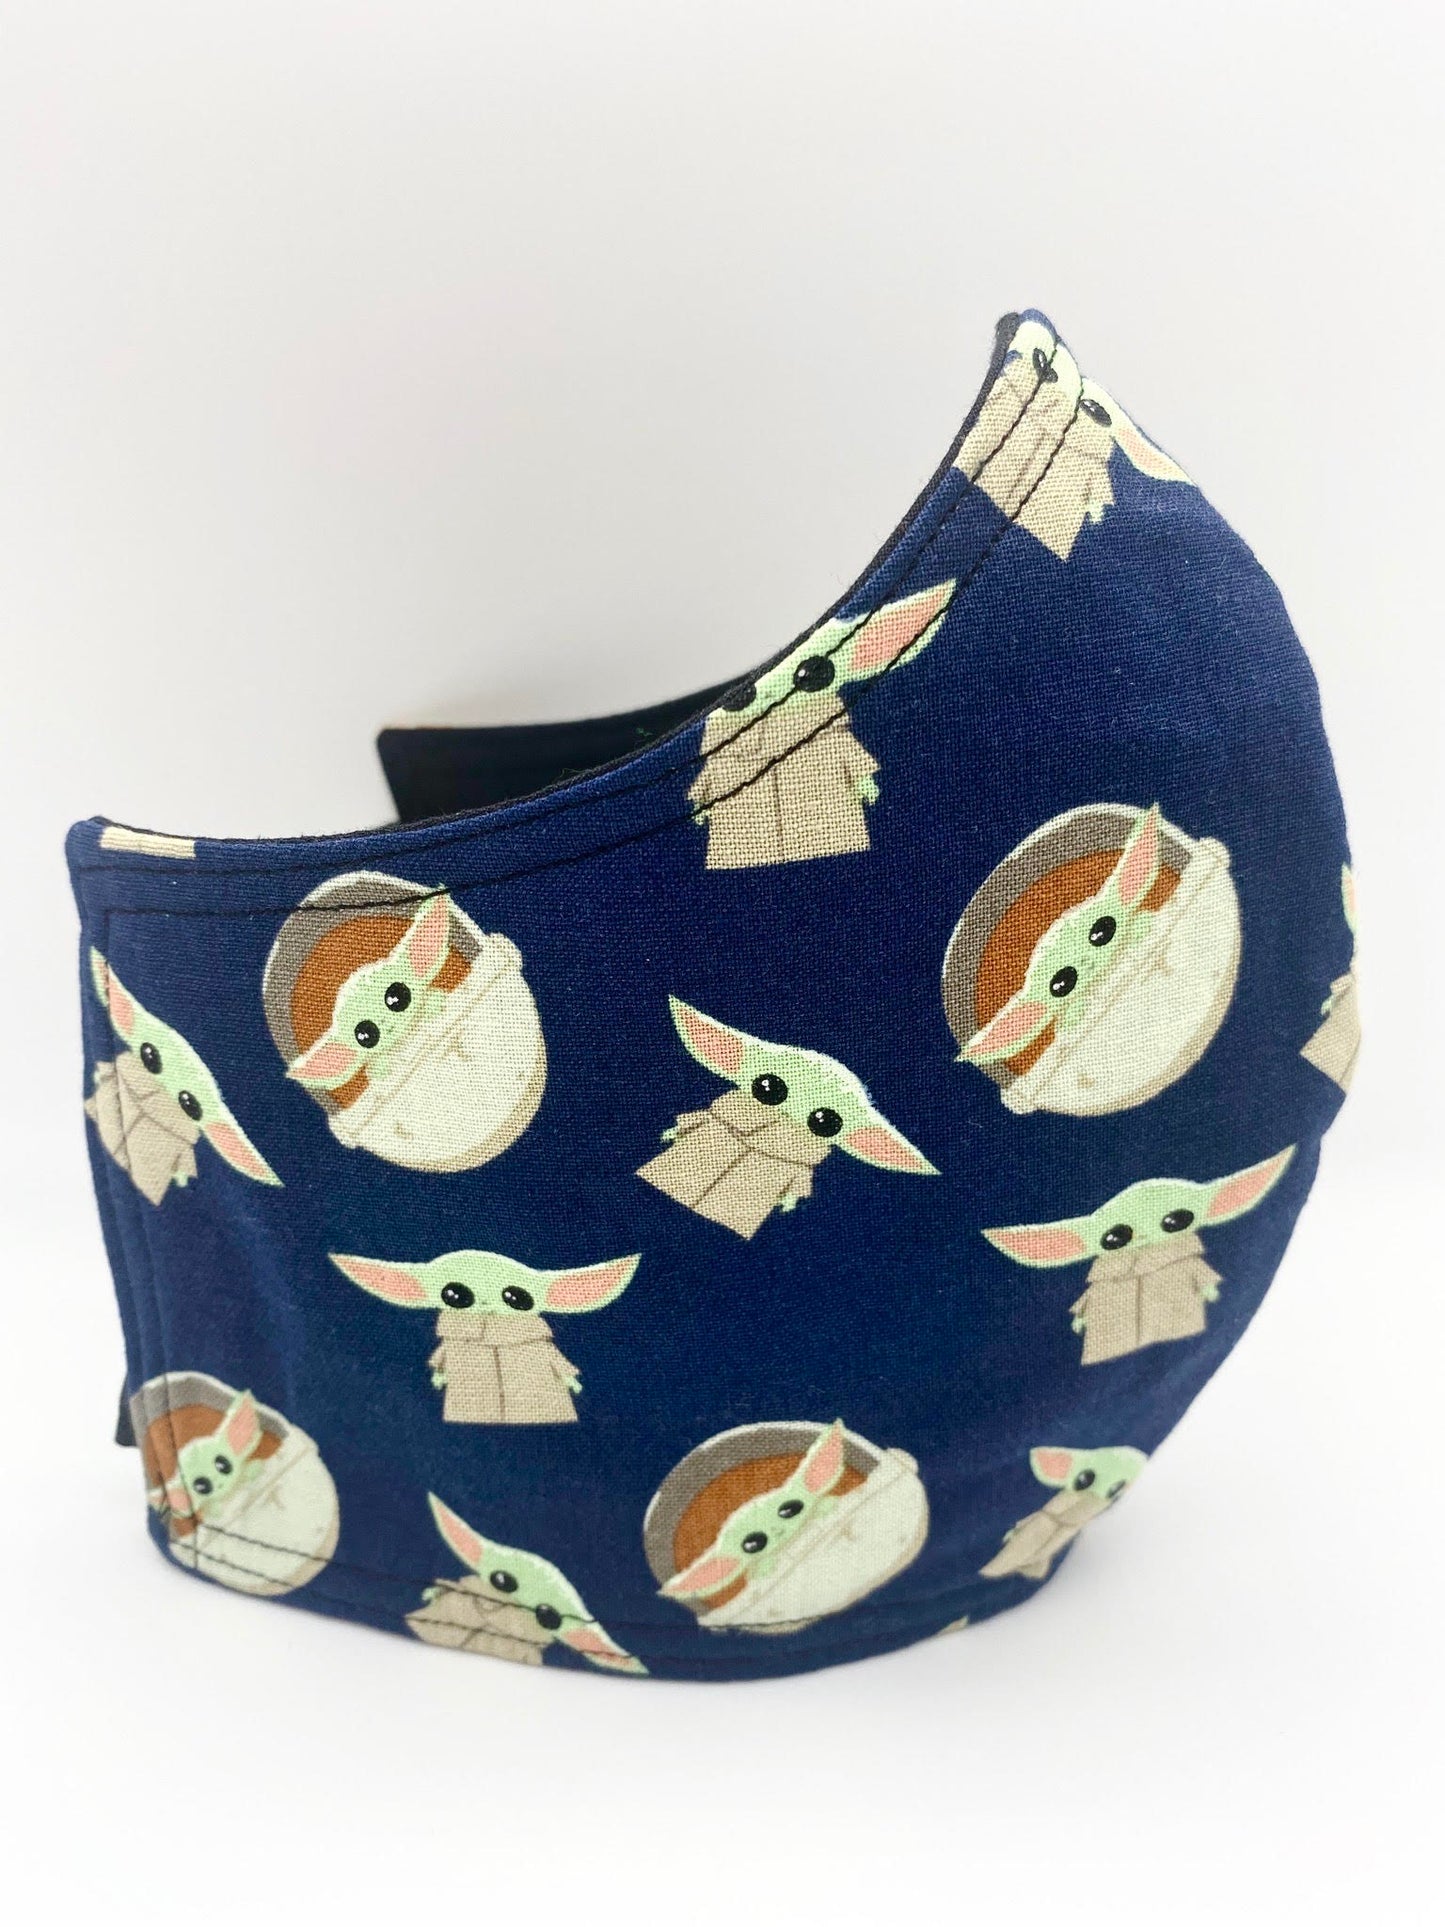 Licensed Print - Navy Blue Baby Yoda: Contoured Adult Face Masks (One Size Fits Most; Ages 11+)